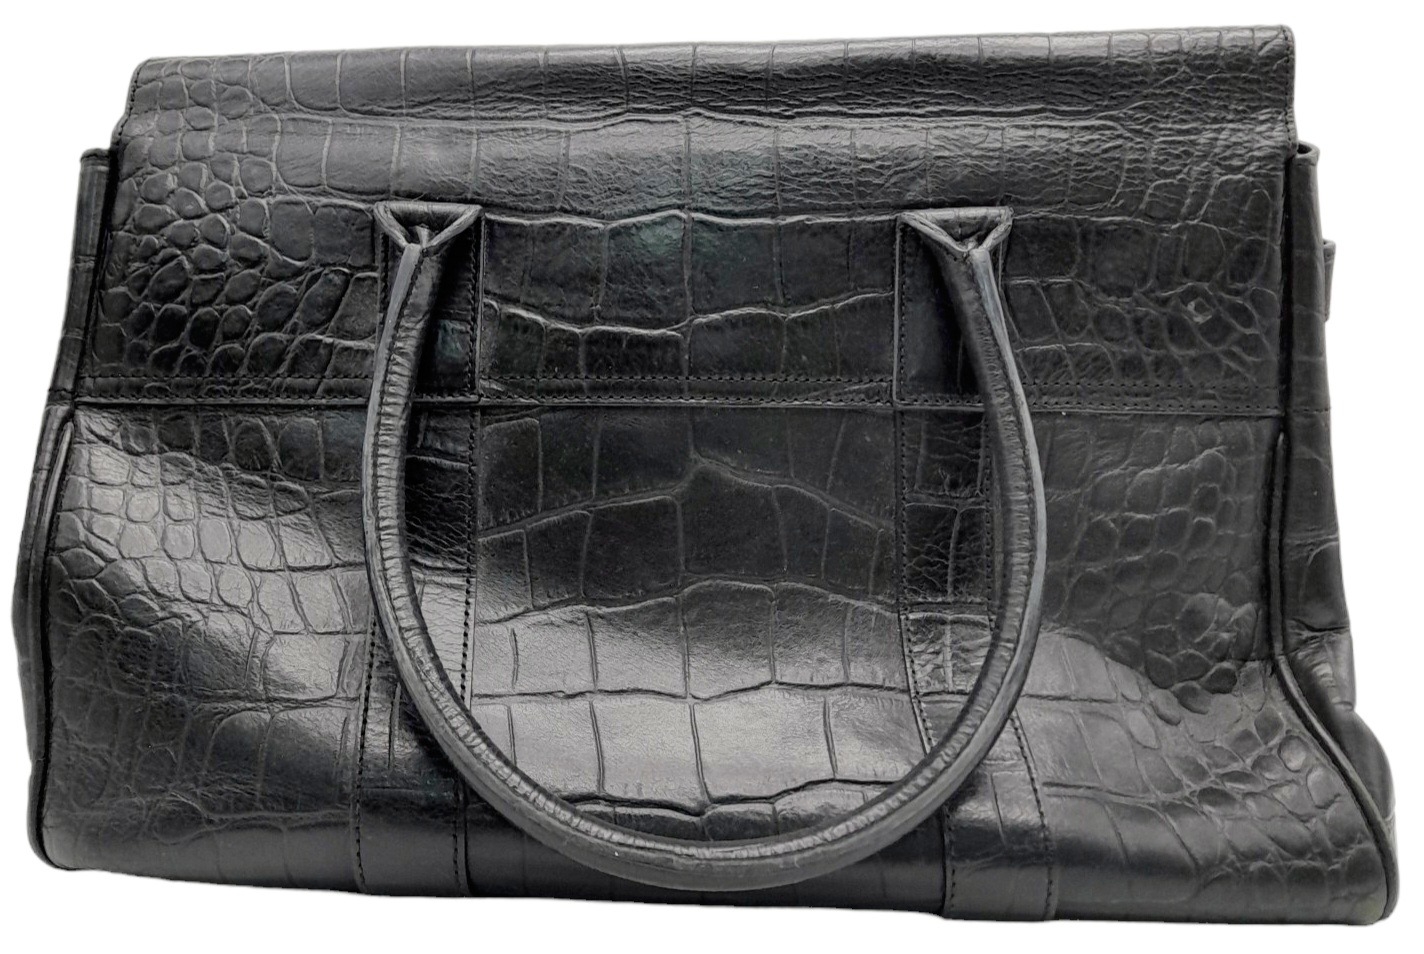 A Mulberry Bayswater Handbag. Black Croc Embossed Leather exterior, gold-tone hardware, a clochette, - Image 4 of 7